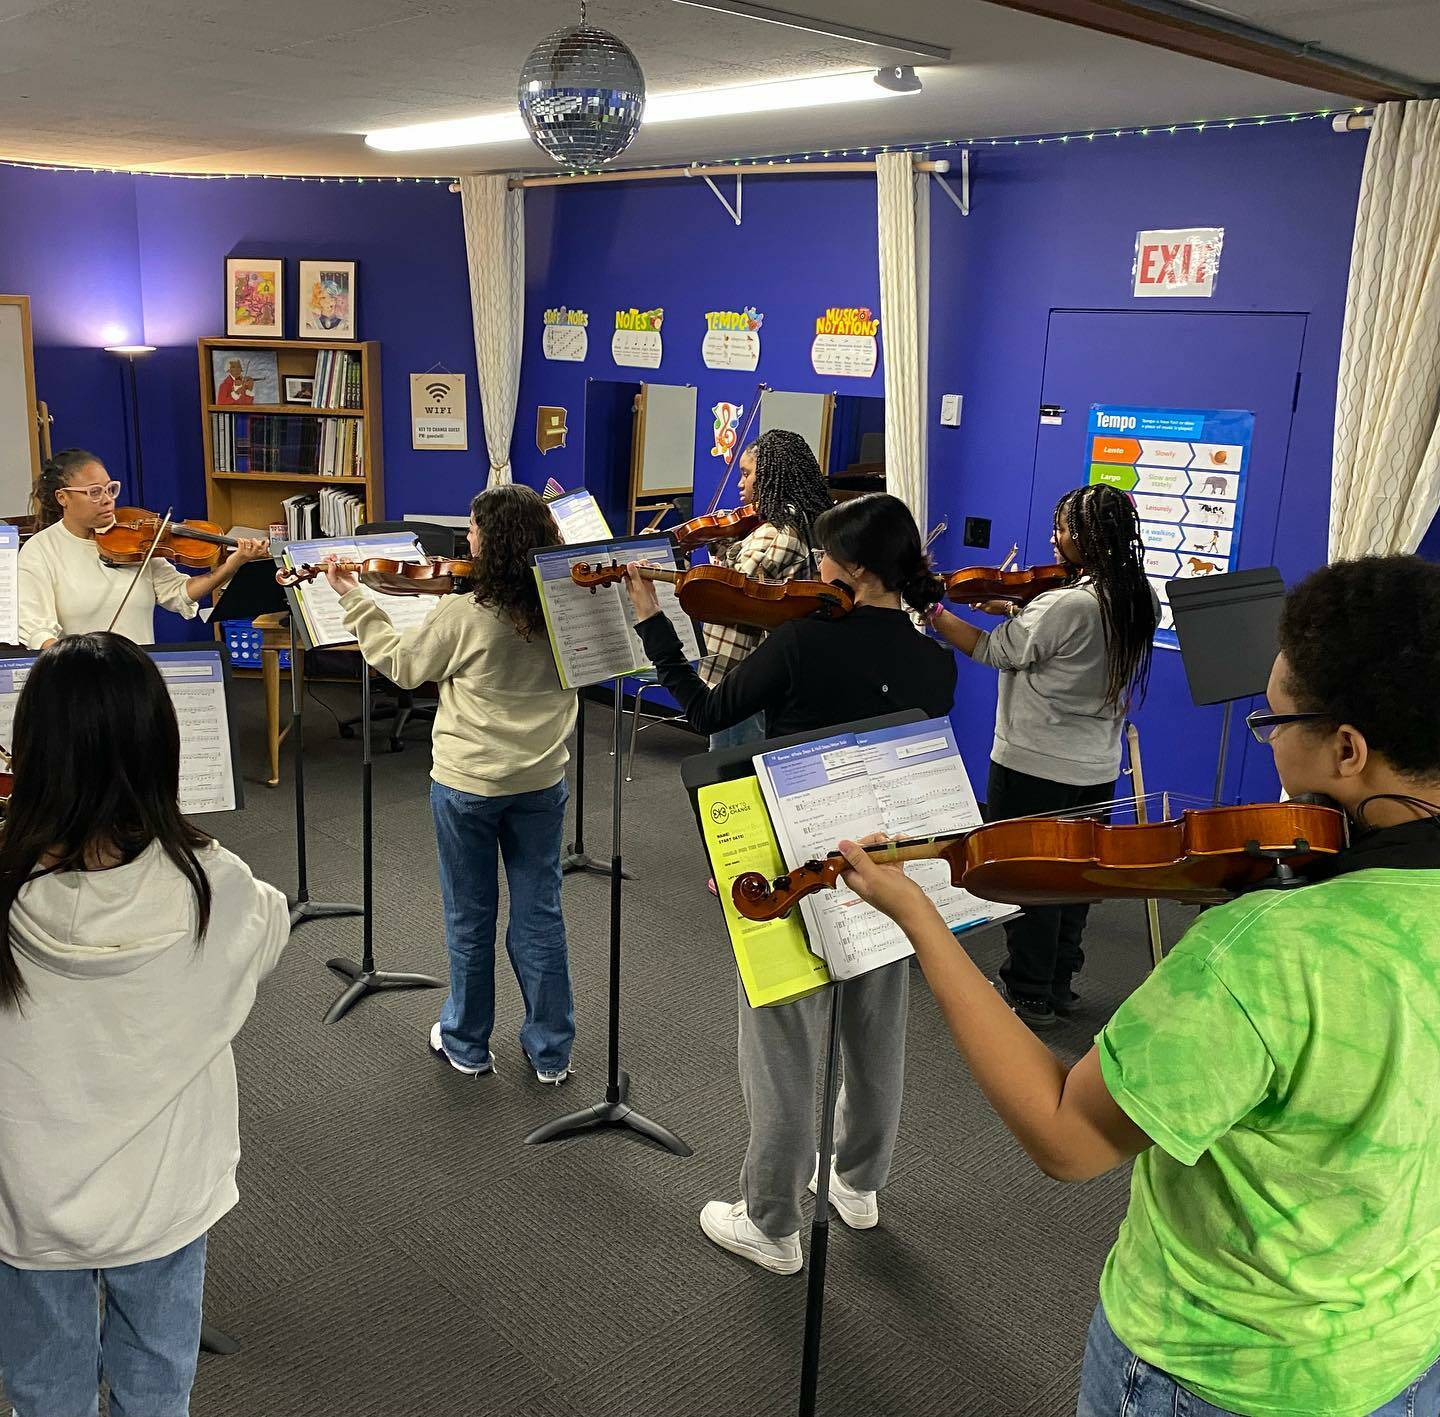 Photos courtesy of Key To Change
In Jan. 2023, Key To Change was visited by violist Jennifer Arnold for group and private lessons.